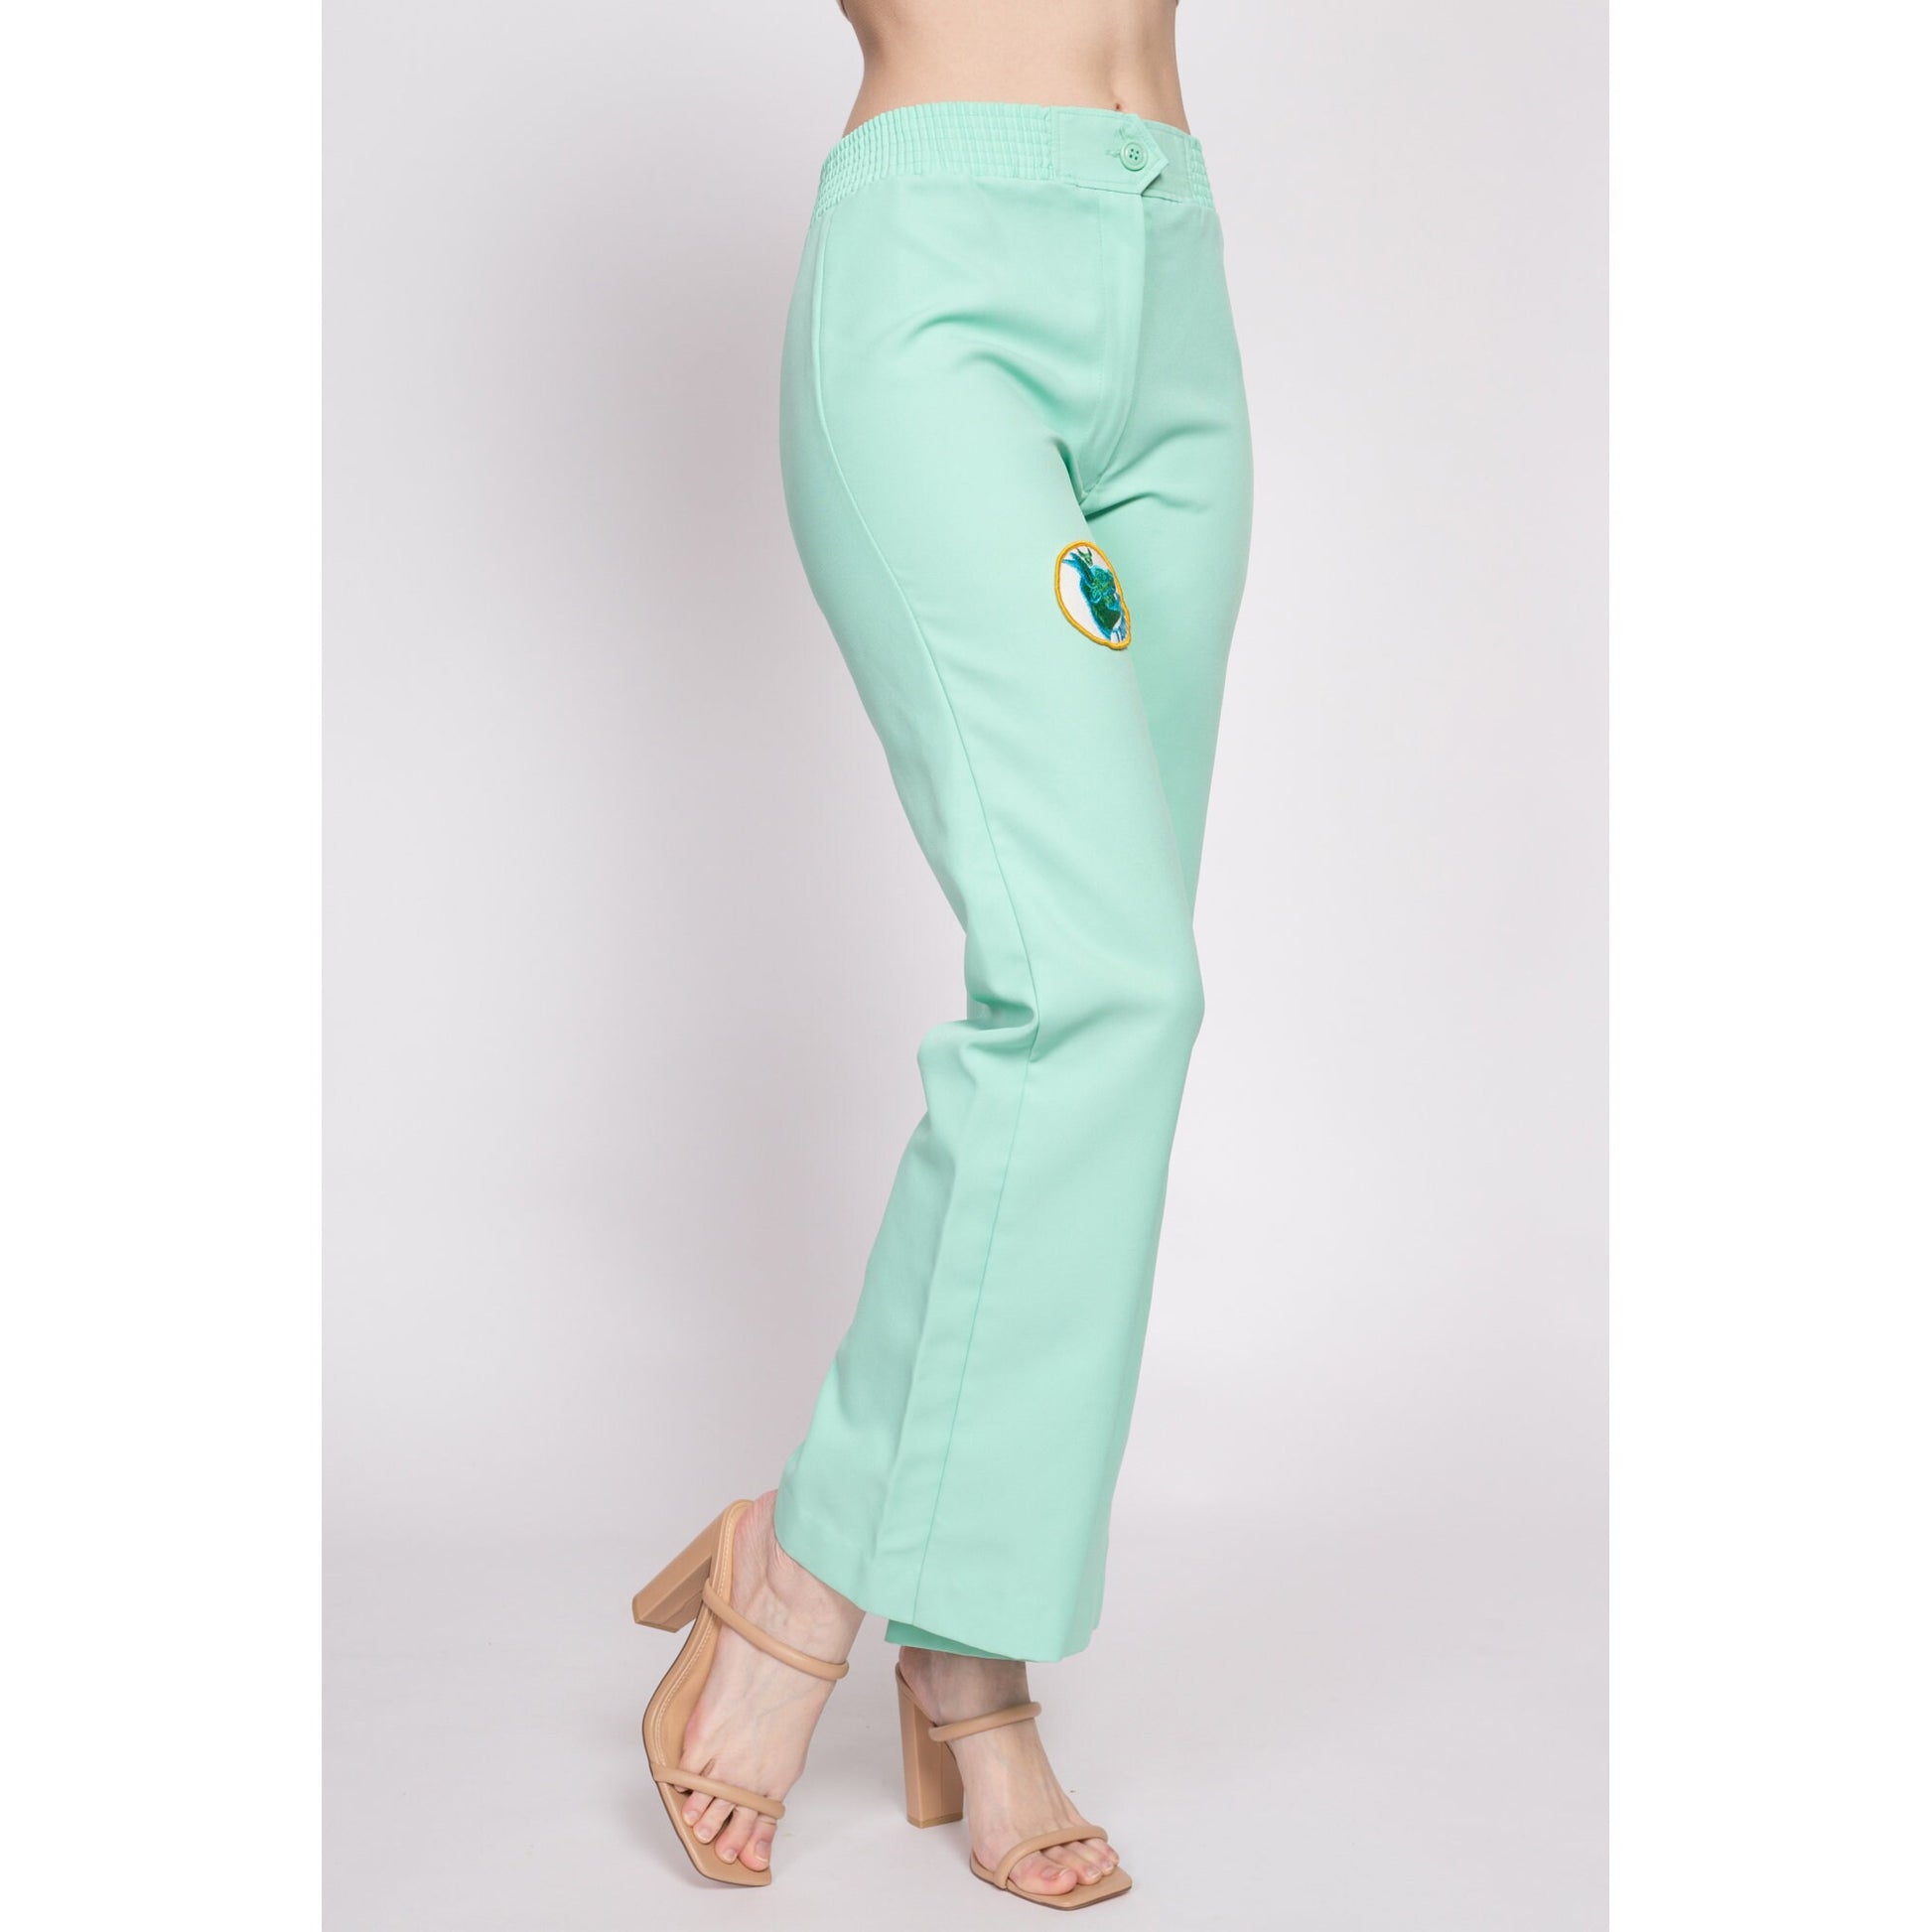 70s Taurus Patch High Waisted Pants - Small to Petite Medium | Vintage Mint Green Boho Flared Polyester Trousers